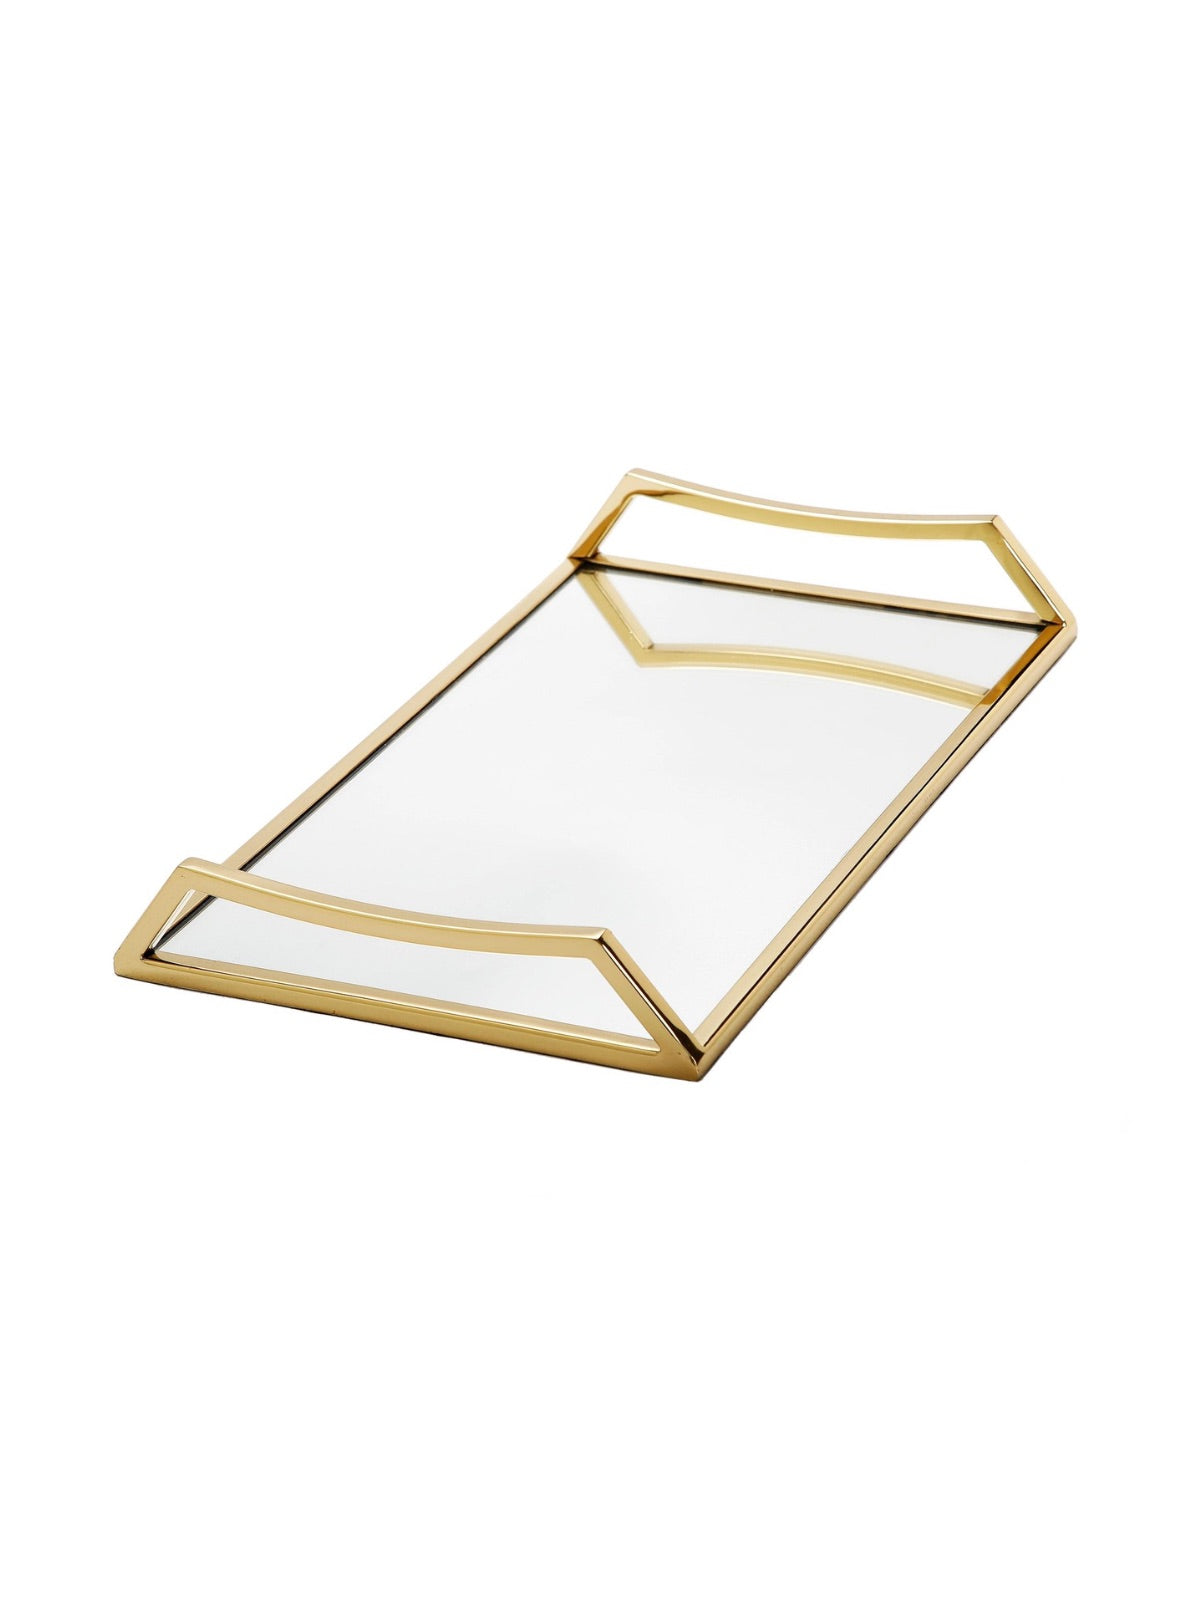 16L inches Oblong Mirror Serving Tray with Gold Handles.